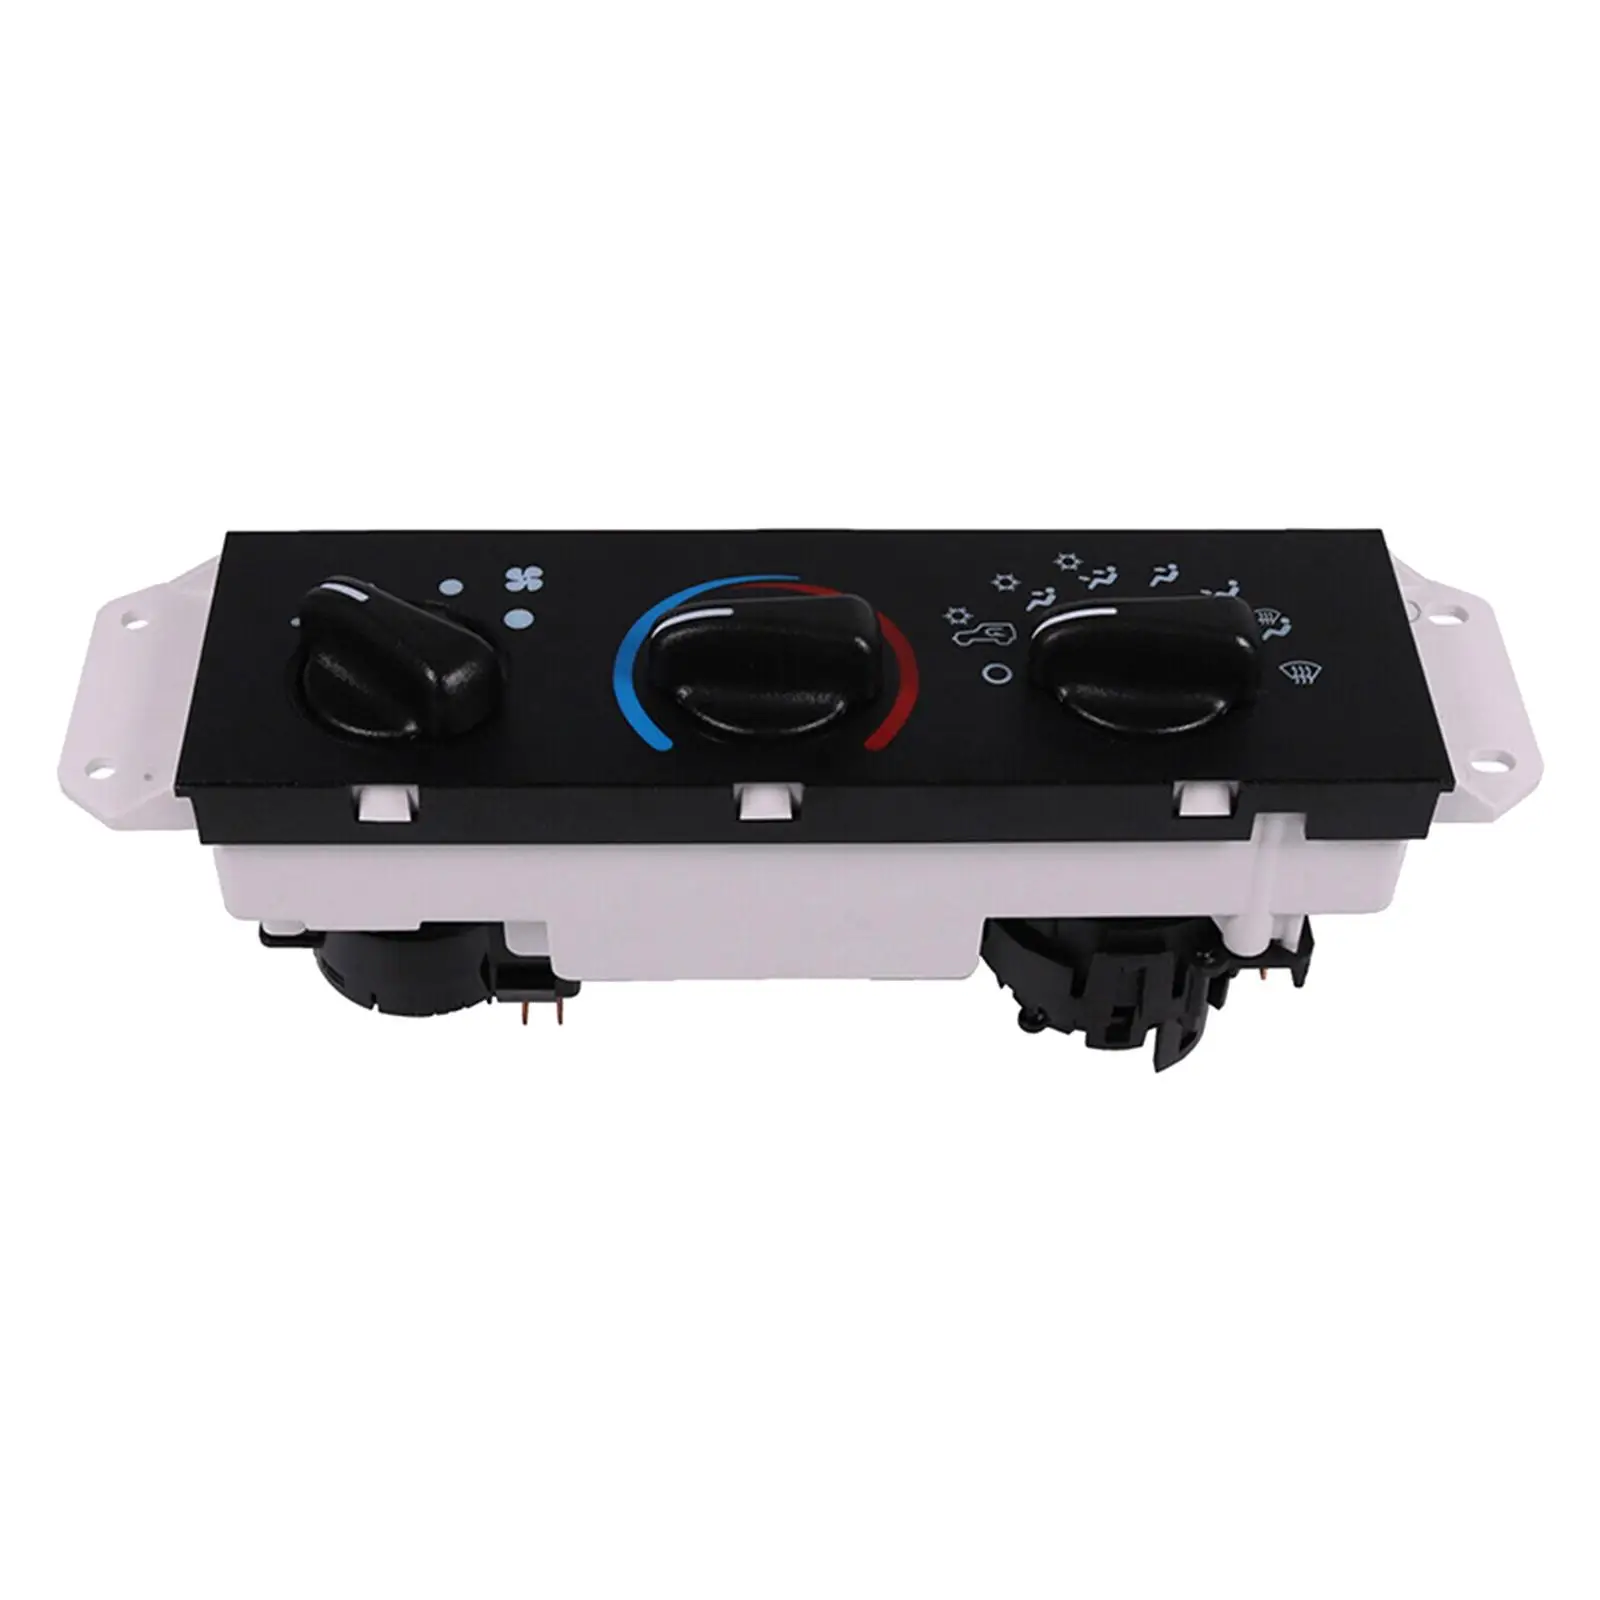 AC Heater Climate Control Unit Easy Installation for Jeep Wrangler